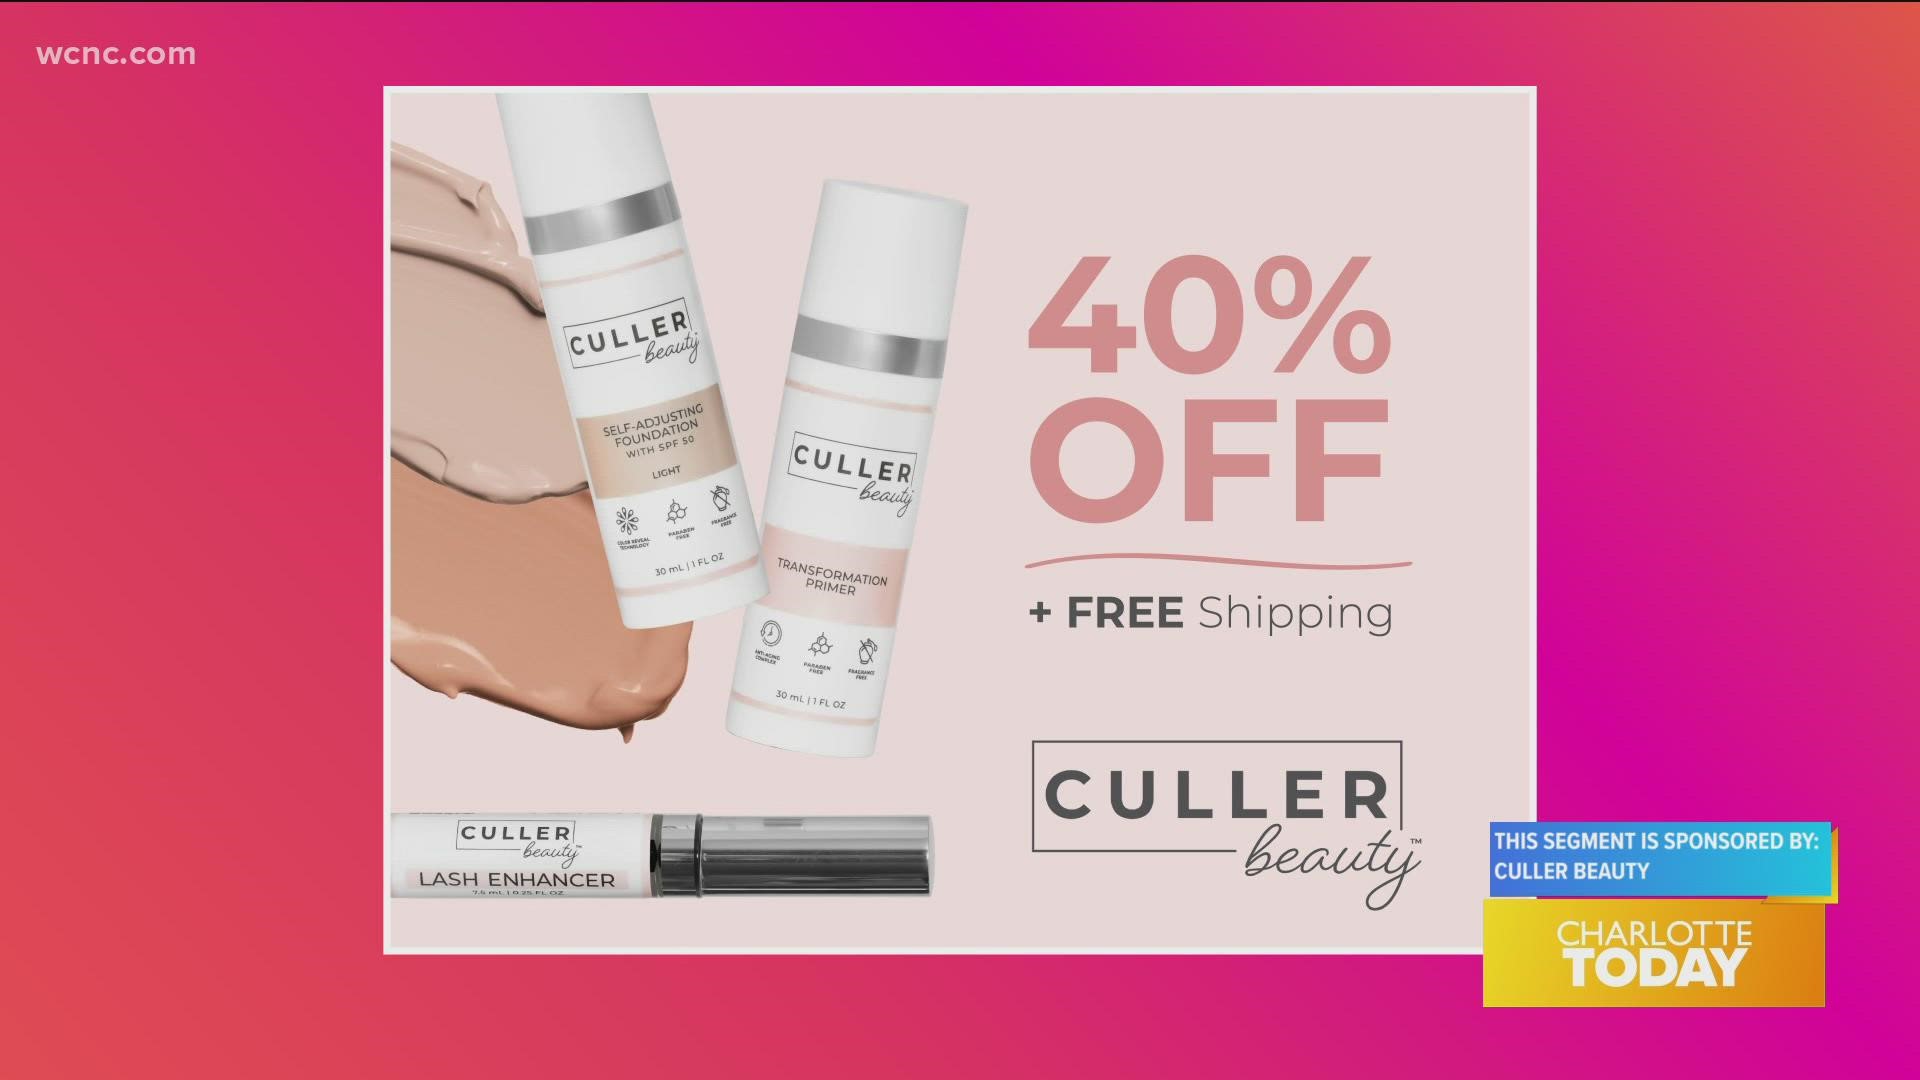 Culler Beauty is the only bottle of foundation you need all year